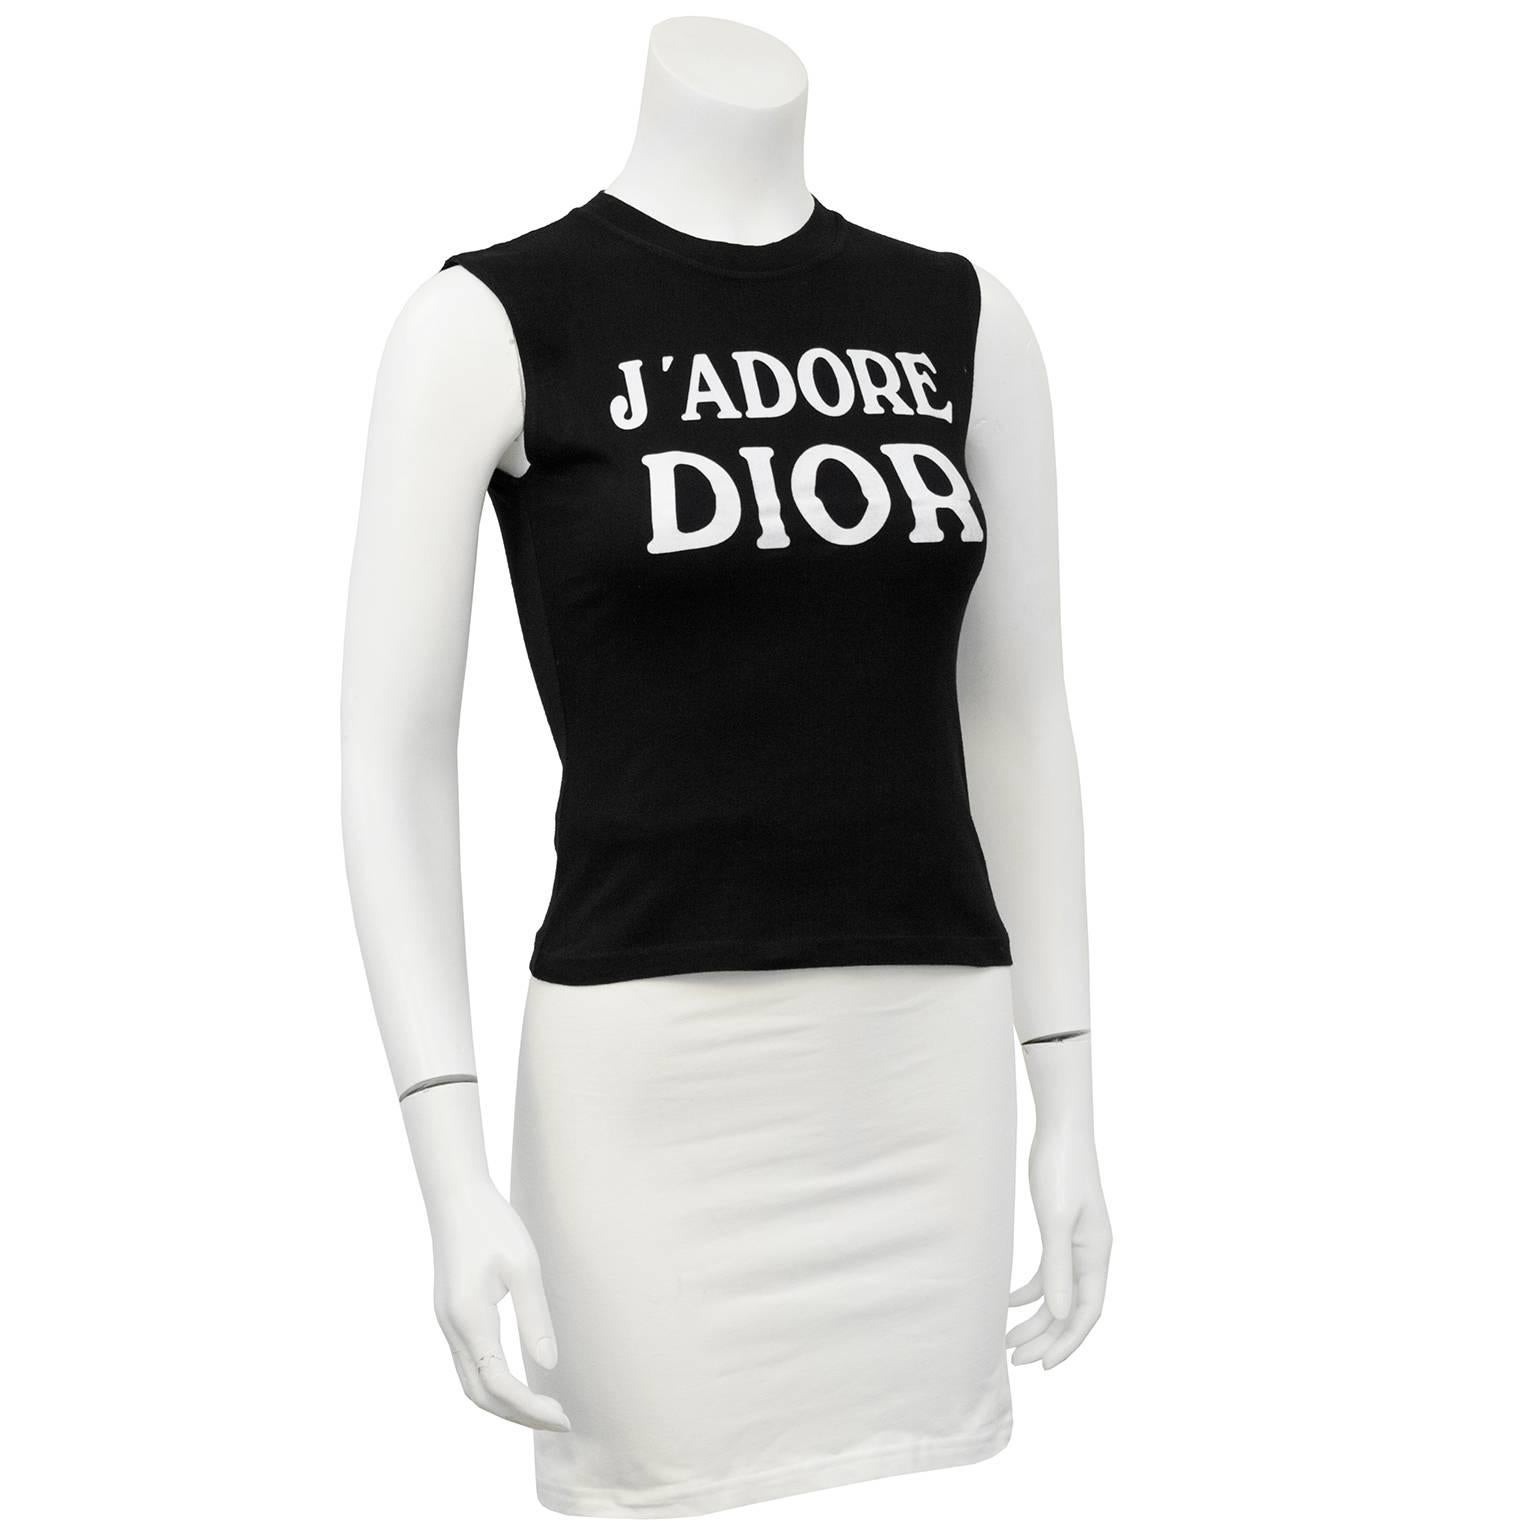 Iconic authentic John Galliano for Dior 1990's black with white 'J'ADORE DIOR' muscle t-shirt. Worn by many celebrities. Similar version worn by Carrie Bradshaw in the movie Sex and the City 2. Covetable and collectable. 100% cotton, excellent